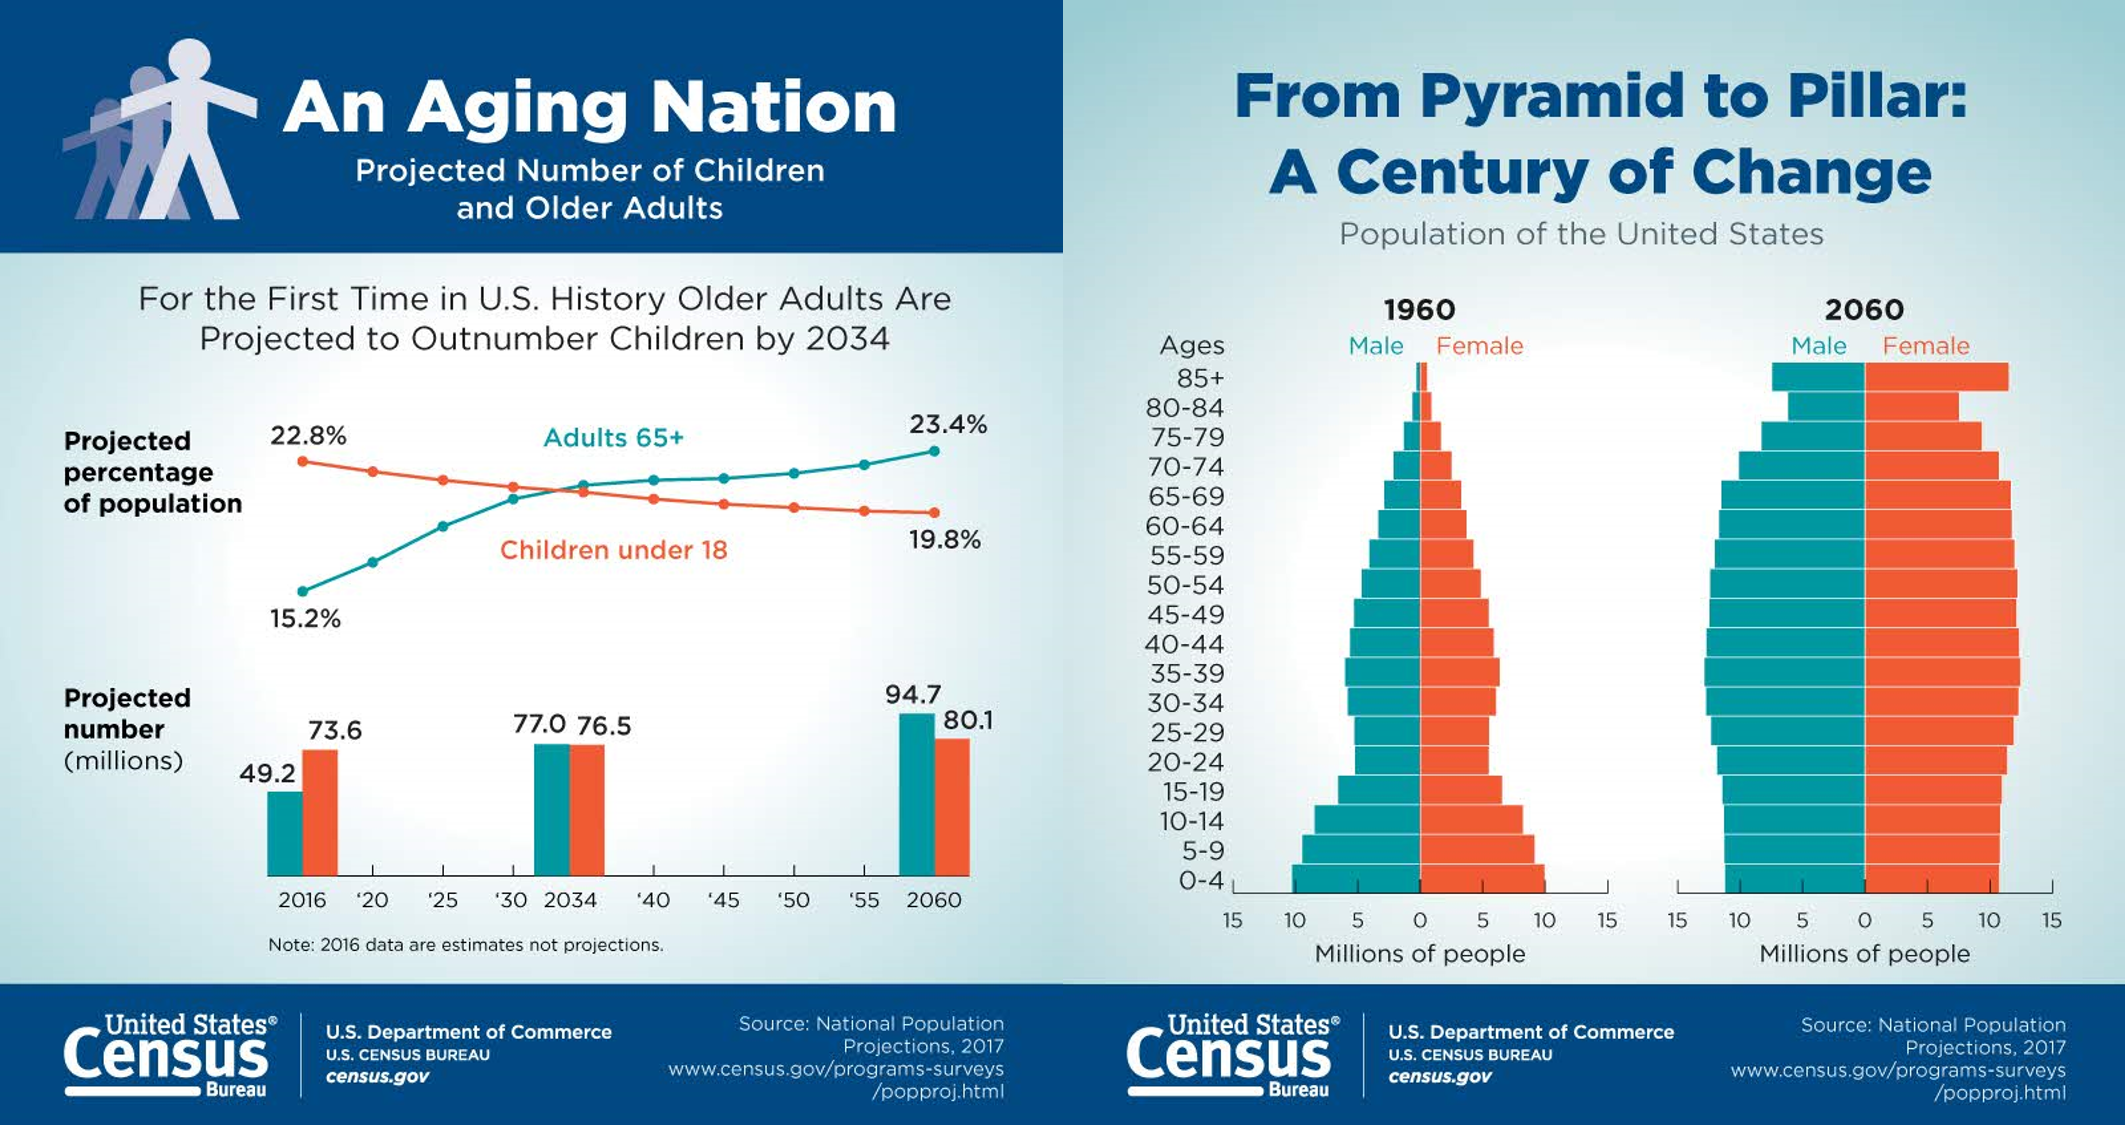 Population pyramid is more rectangular with each cohort similar in size; youngest cohorts are smallest